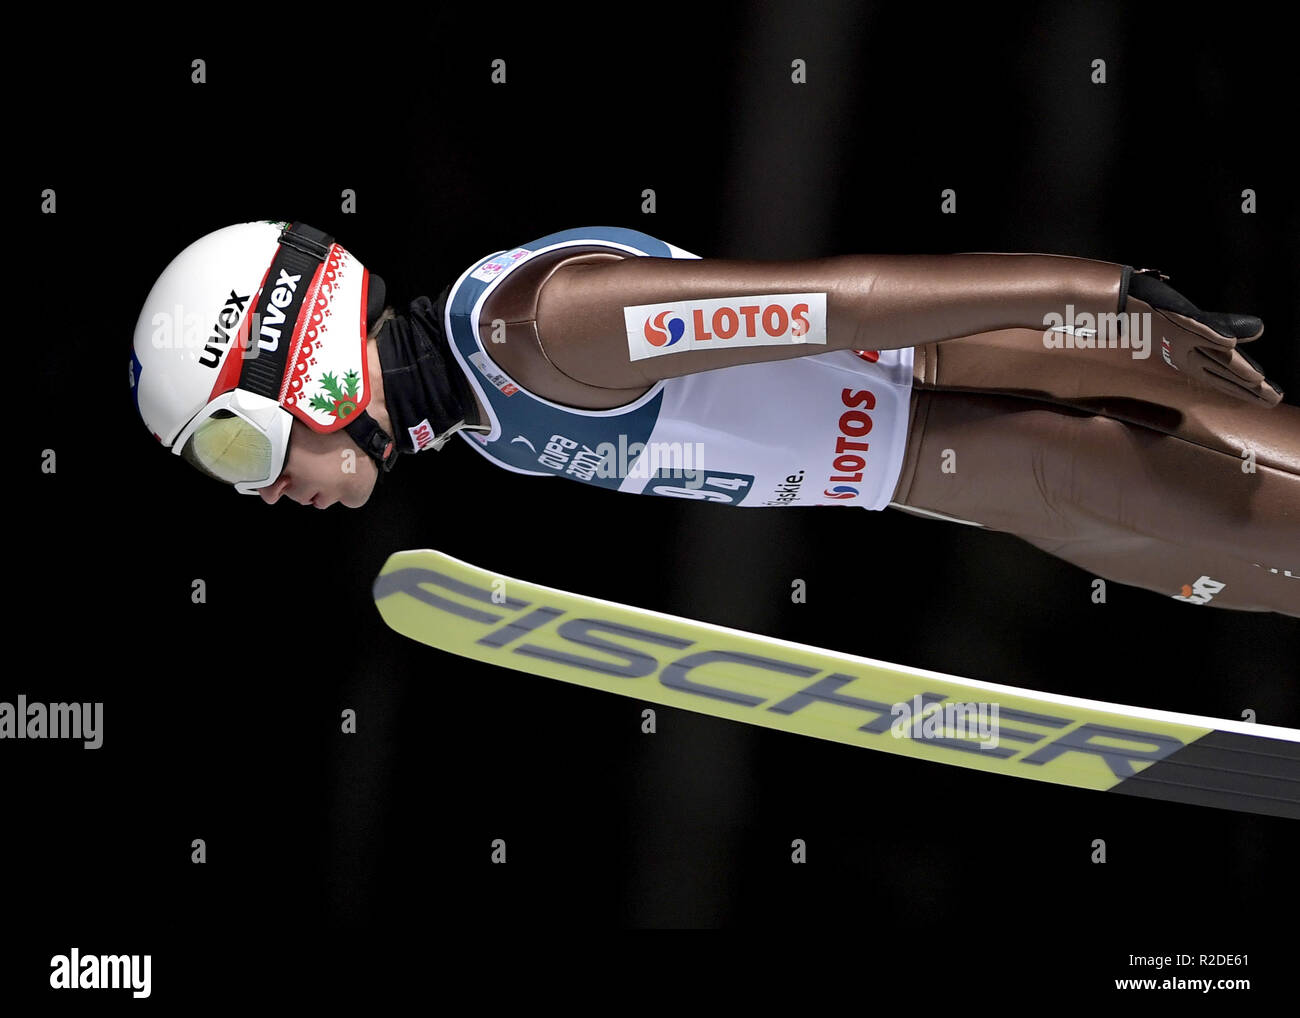 Kamil Stoch  World Cup FIS Ski Jumping on November 17, 2018 in Wisla, Poland. Stock Photo